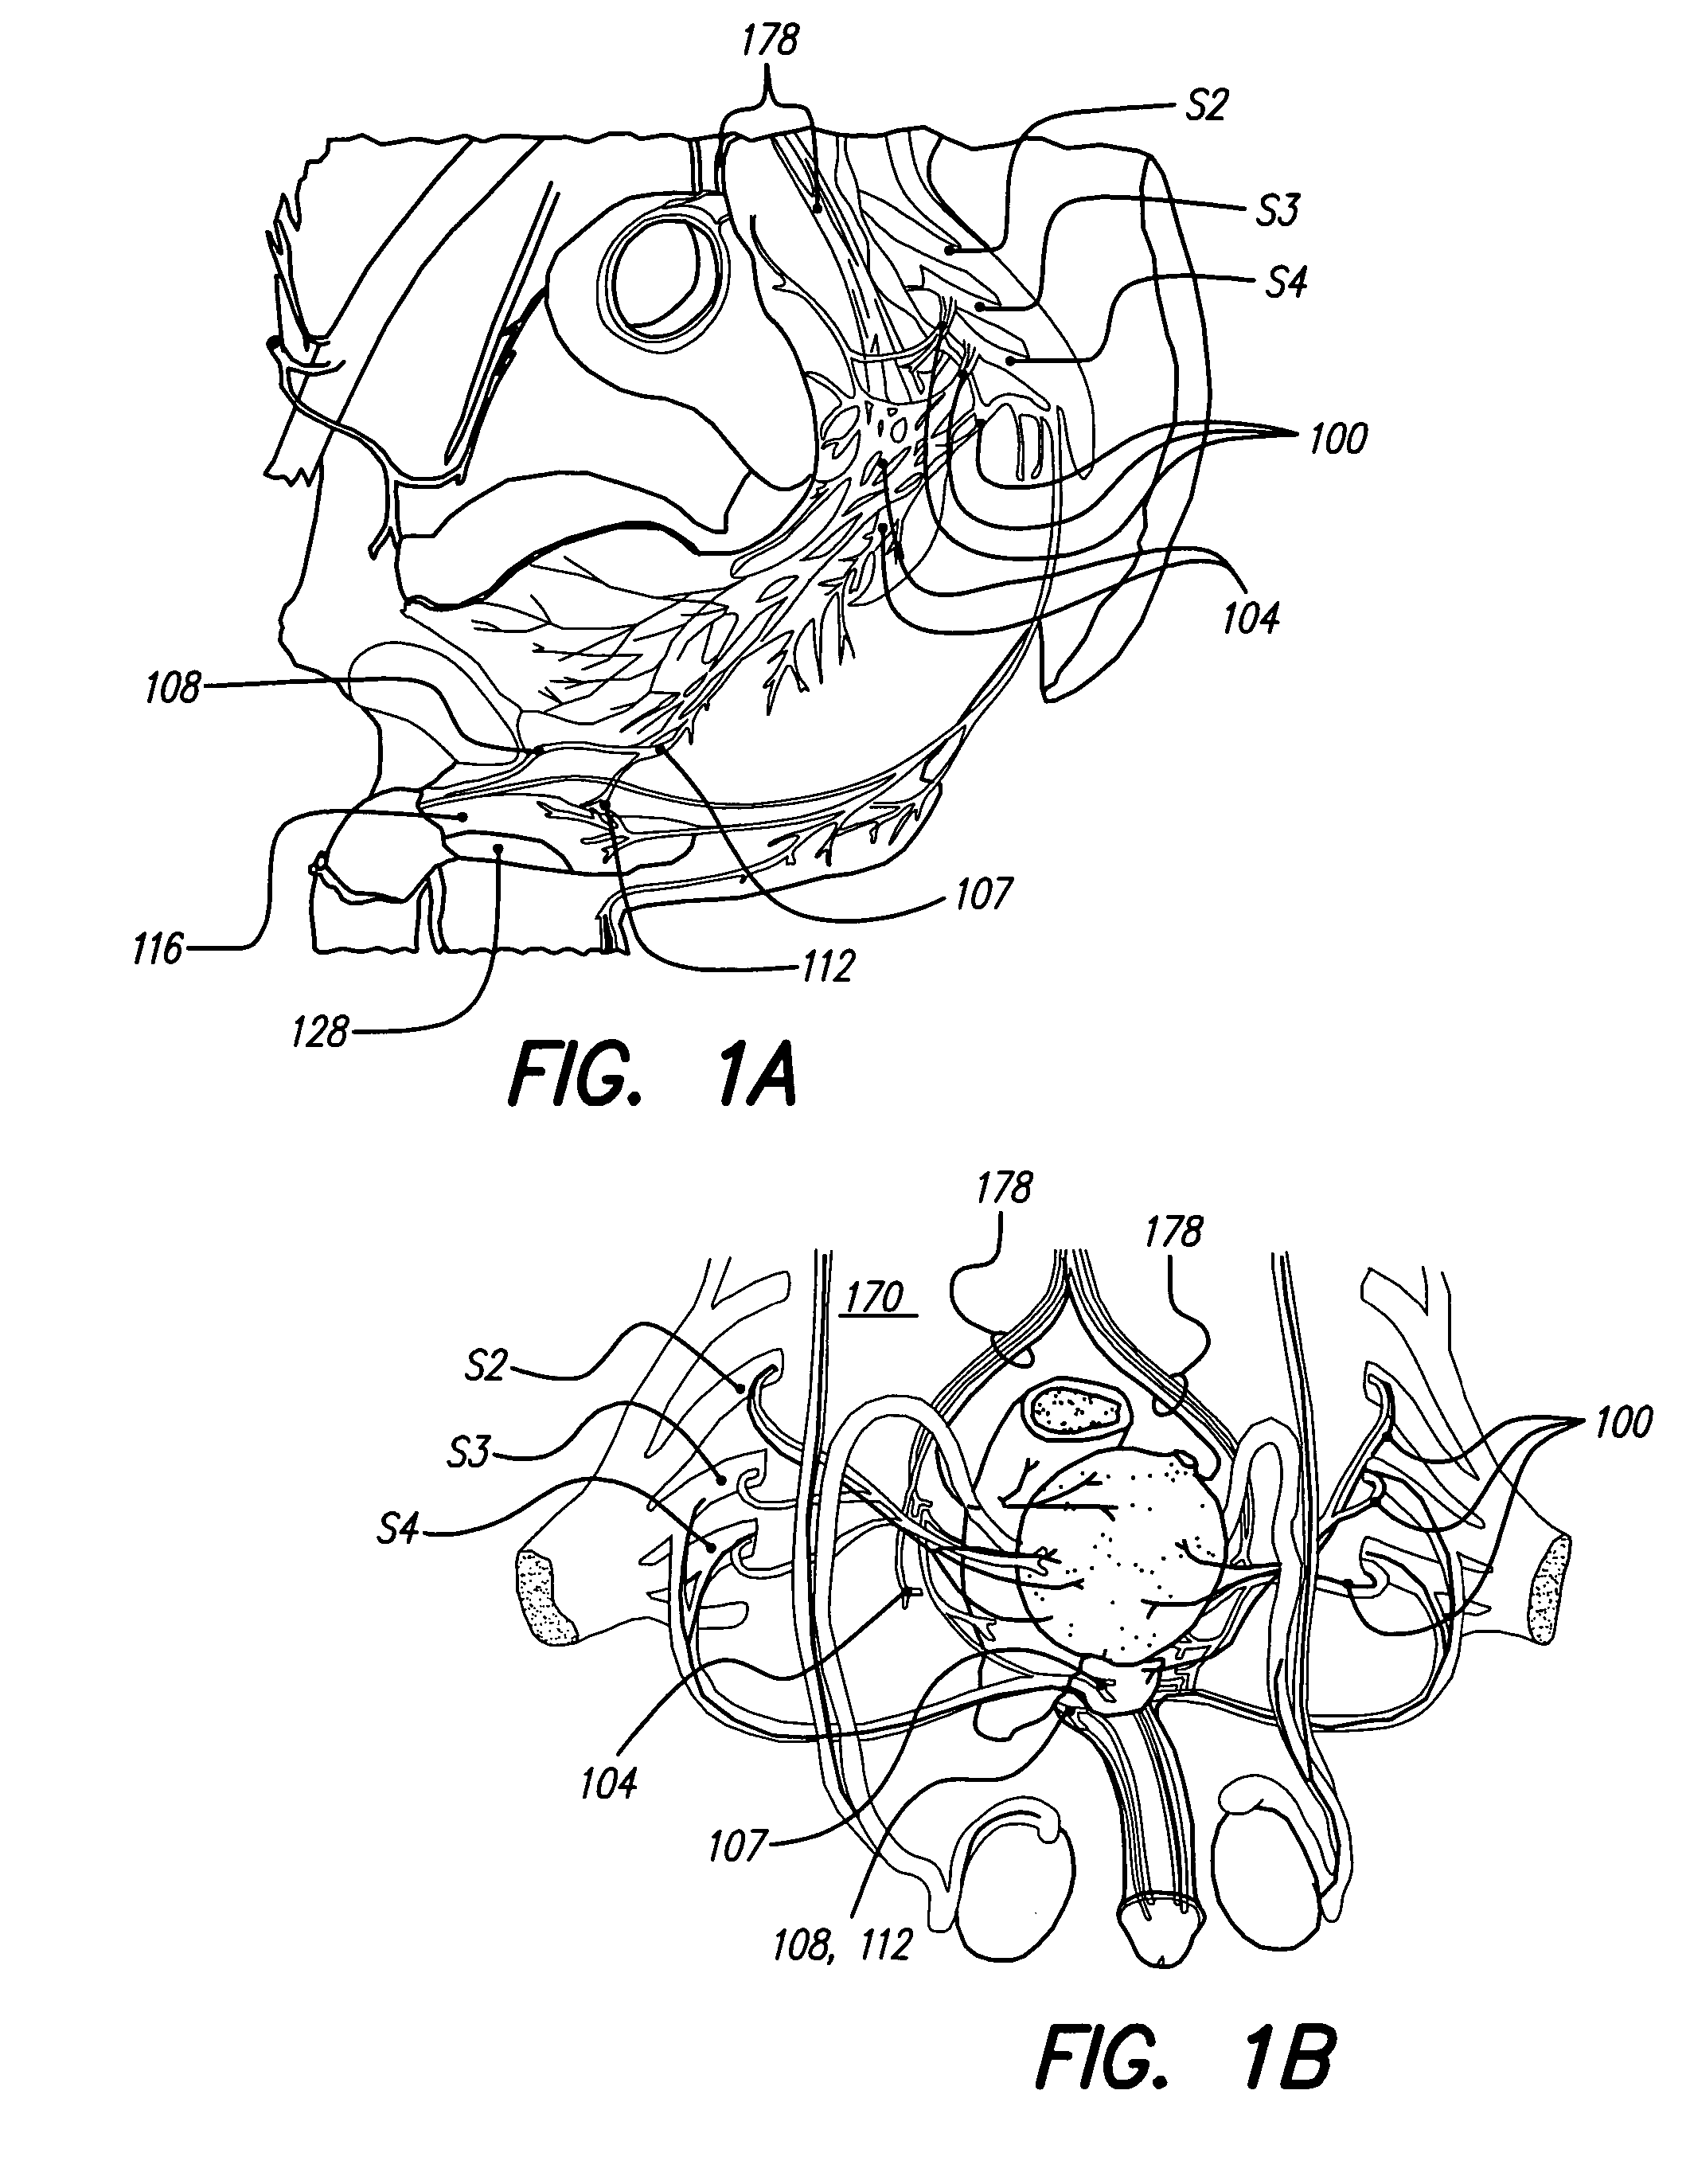 Methods and systems for electrical and/or drug stimulation as a therapy for erectile dysfunction